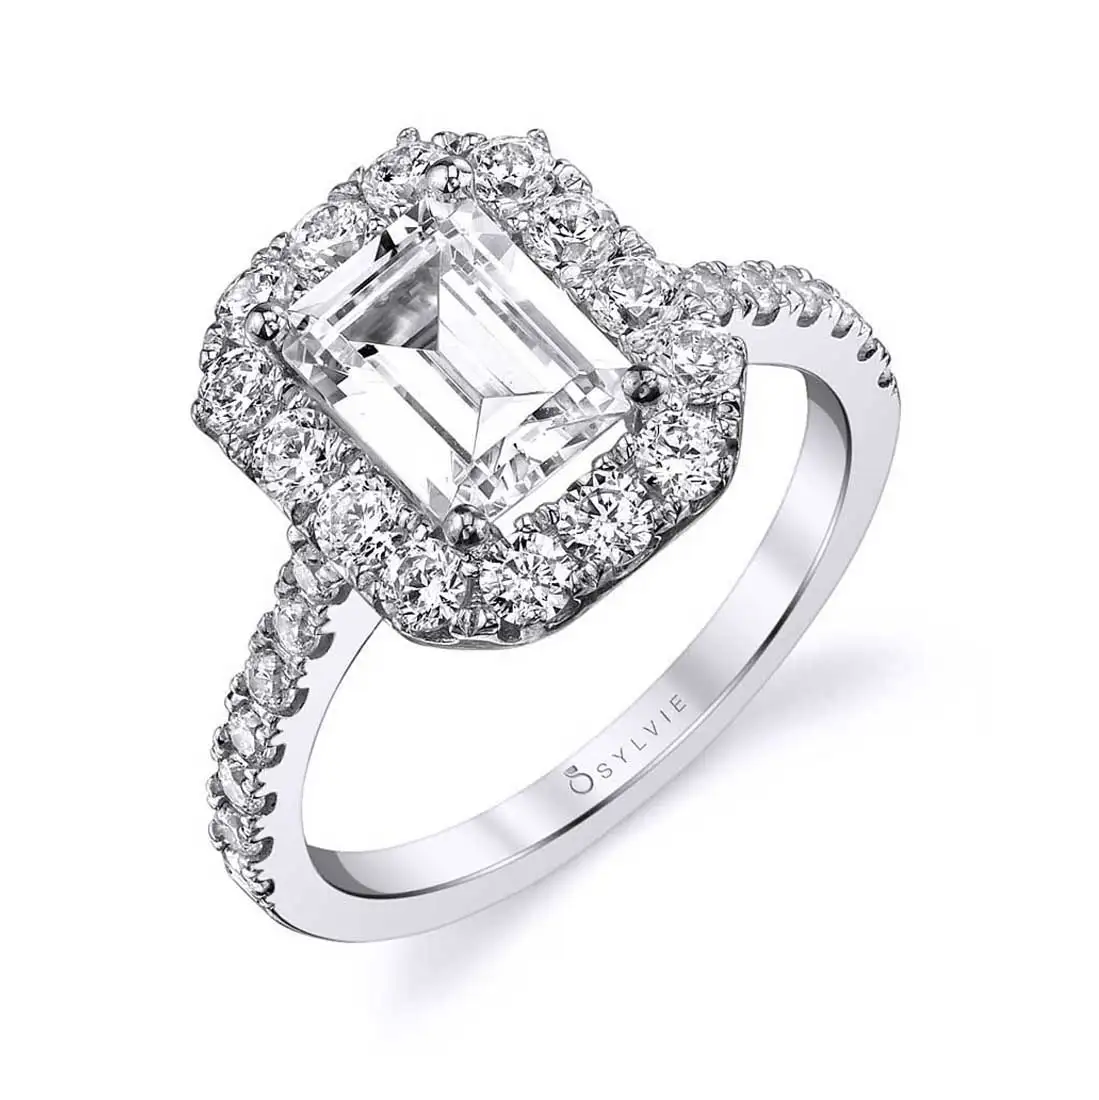 Emerald Cut Engagement Ring with halo